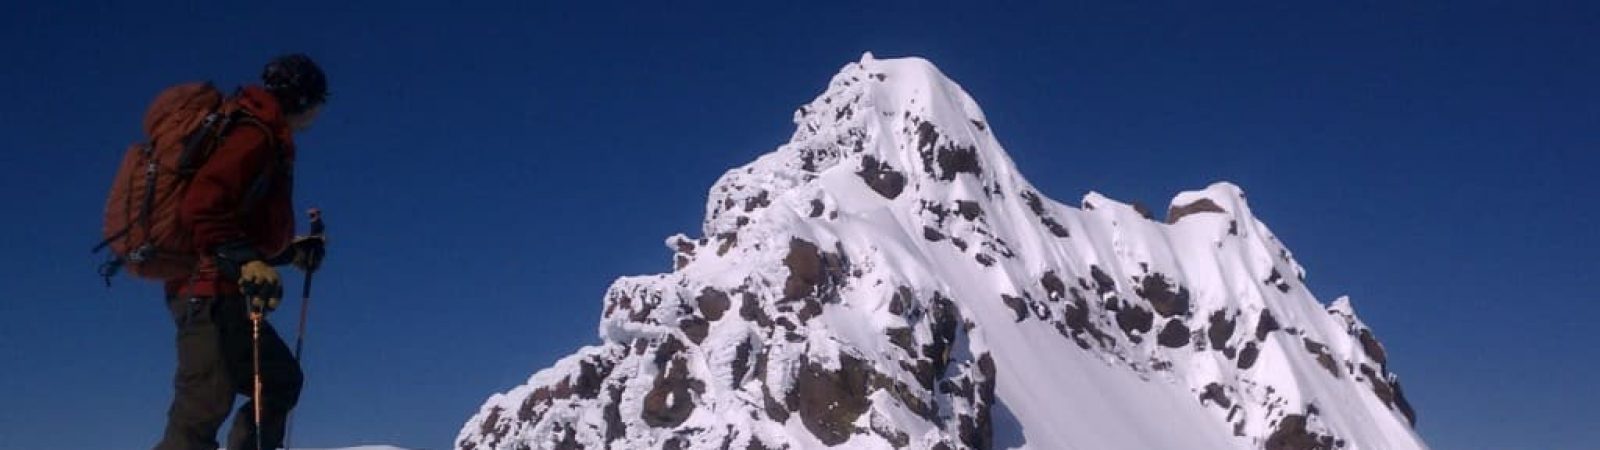 3-day Ski Mountaineering Camp in California | United States